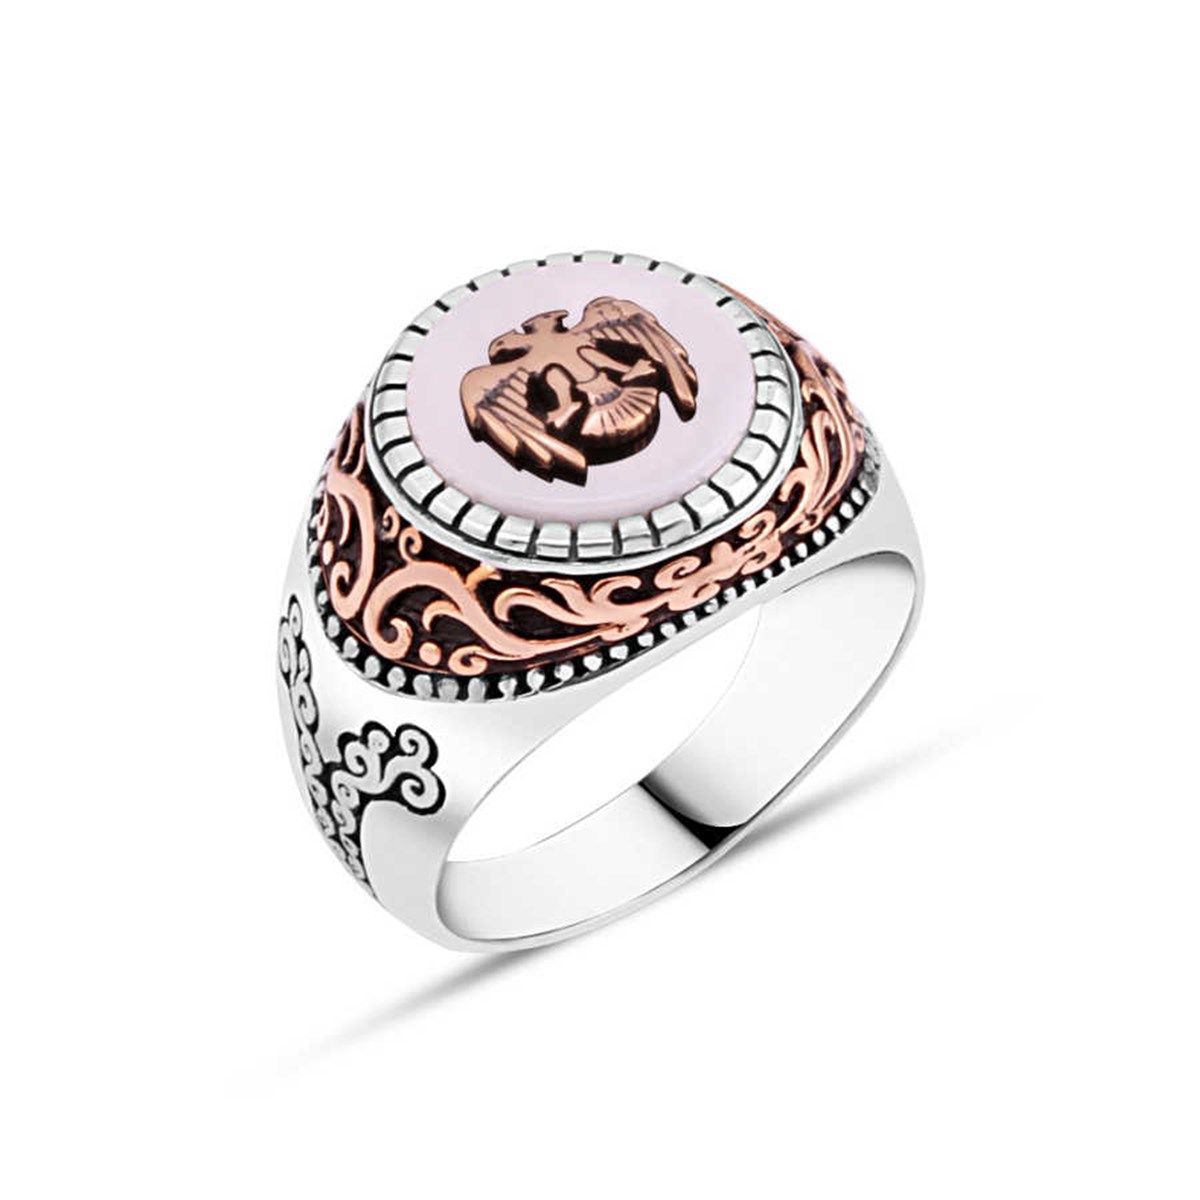 Seljuk Eagle Silver Men's Ring on Mother of Pearl Stone